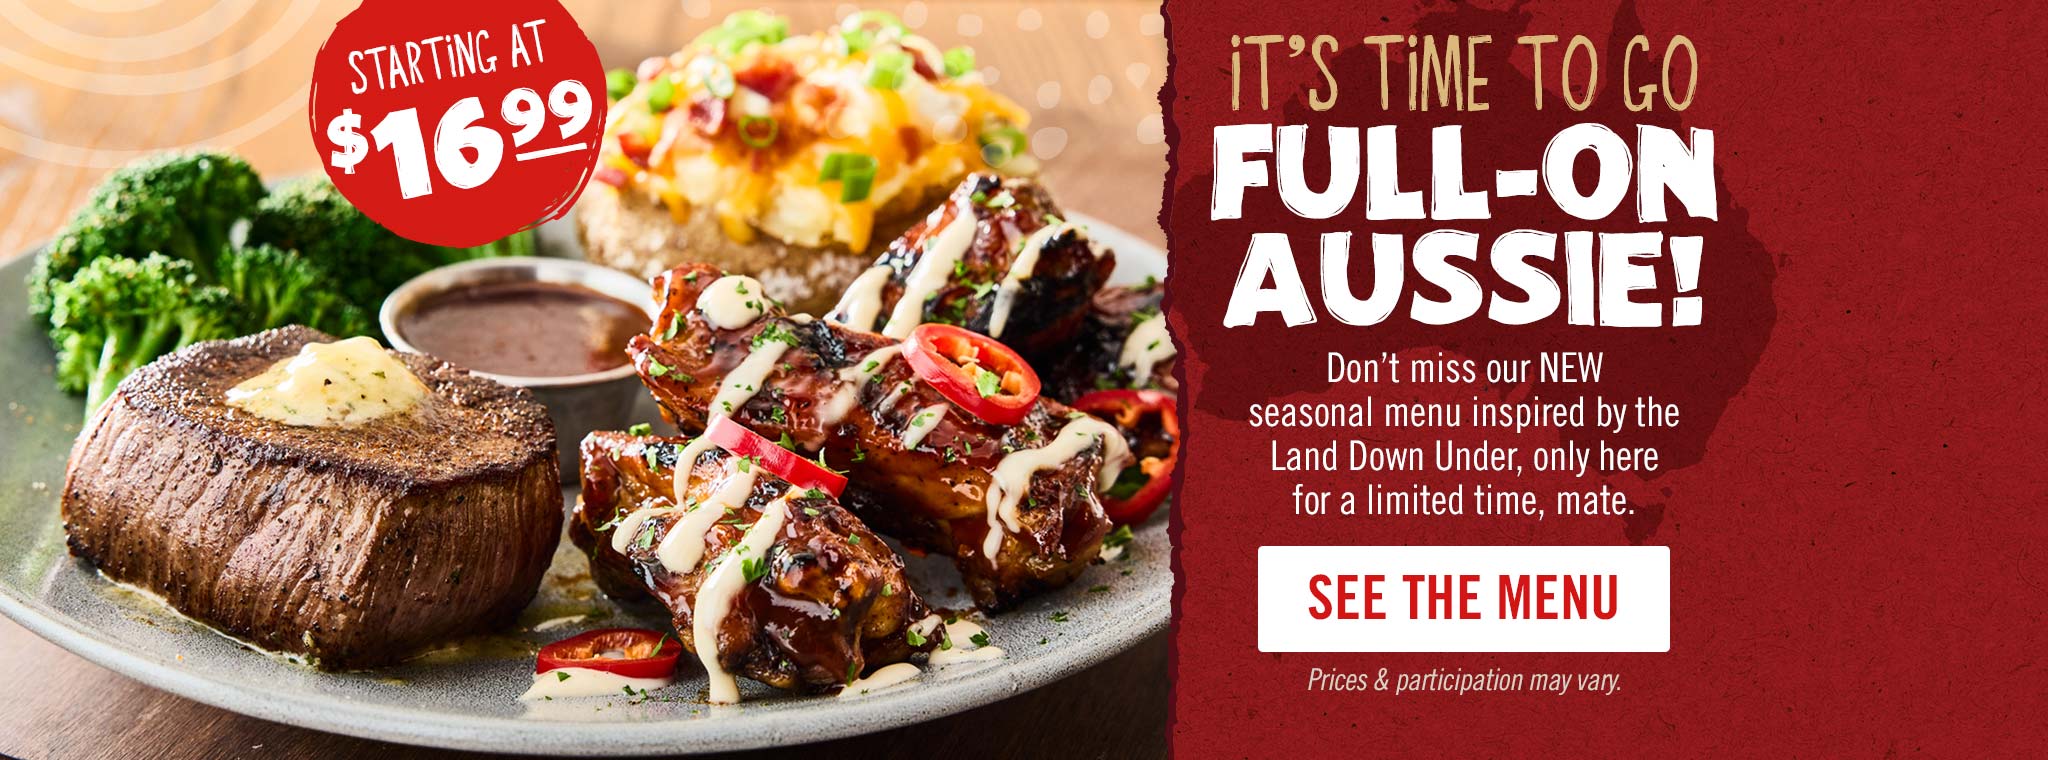 outback steakhouse lunch menu